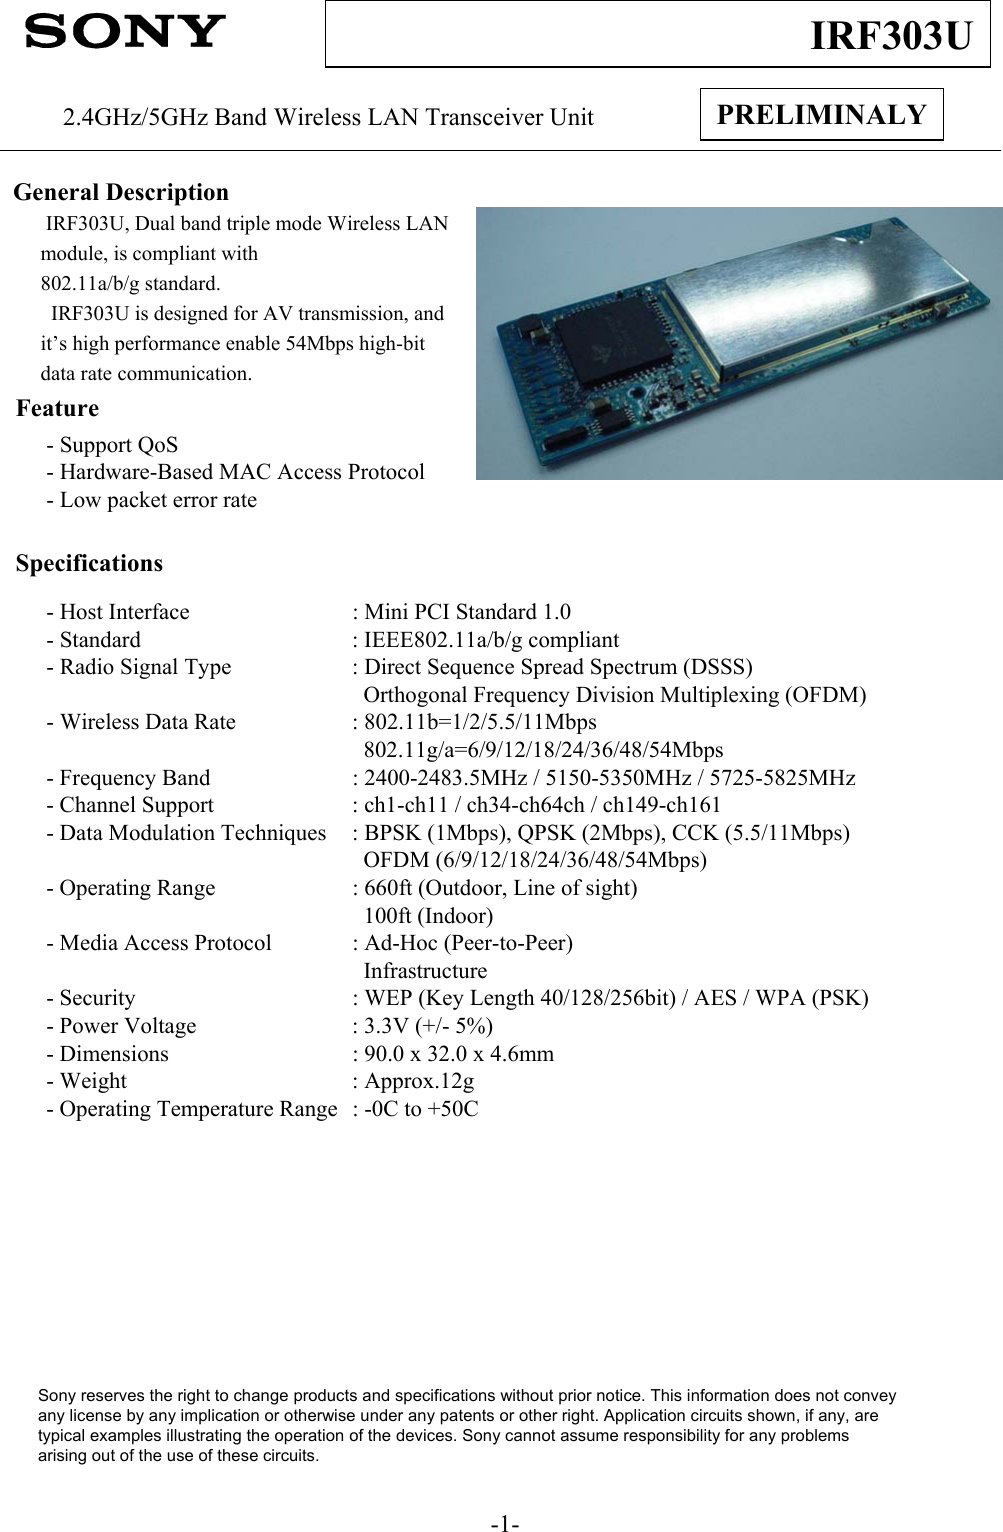 -1-IRF303UPRELIMINALY2.4GHz/5GHz Band Wireless LAN Transceiver UnitGeneral DescriptionIRF303U, Dual band triple mode Wireless LAN module, is compliant with802.11a/b/g standard.  IRF303U is designed for AV transmission, and it’s high performance enable 54Mbps high-bit data rate communication.Feature- Support QoS- Hardware-Based MAC Access Protocol- Low packet error rateSpecifications- Host Interface : Mini PCI Standard 1.0 - Standard : IEEE802.11a/b/g compliant- Radio Signal Type : Direct Sequence Spread Spectrum (DSSS)Orthogonal Frequency Division Multiplexing (OFDM)- Wireless Data Rate : 802.11b=1/2/5.5/11Mbps802.11g/a=6/9/12/18/24/36/48/54Mbps- Frequency Band : 2400-2483.5MHz / 5150-5350MHz / 5725-5825MHz- Channel Support : ch1-ch11 / ch34-ch64ch / ch149-ch161- Data Modulation Techniques : BPSK (1Mbps), QPSK (2Mbps), CCK (5.5/11Mbps)OFDM (6/9/12/18/24/36/48/54Mbps)- Operating Range : 660ft (Outdoor, Line of sight)100ft (Indoor)- Media Access Protocol : Ad-Hoc (Peer-to-Peer)Infrastructure- Security : WEP (Key Length 40/128/256bit) / AES / WPA (PSK)- Power Voltage : 3.3V (+/- 5%)- Dimensions : 90.0 x 32.0 x 4.6mm- Weight : Approx.12g- Operating Temperature Range : -0C to +50CSony reserves the right to change products and specifications without prior notice. This information does not conveyany license by any implication or otherwise under any patents or other right. Application circuits shown, if any, aretypical examples illustrating the operation of the devices. Sony cannot assume responsibility for any problemsarising out of the use of these circuits.